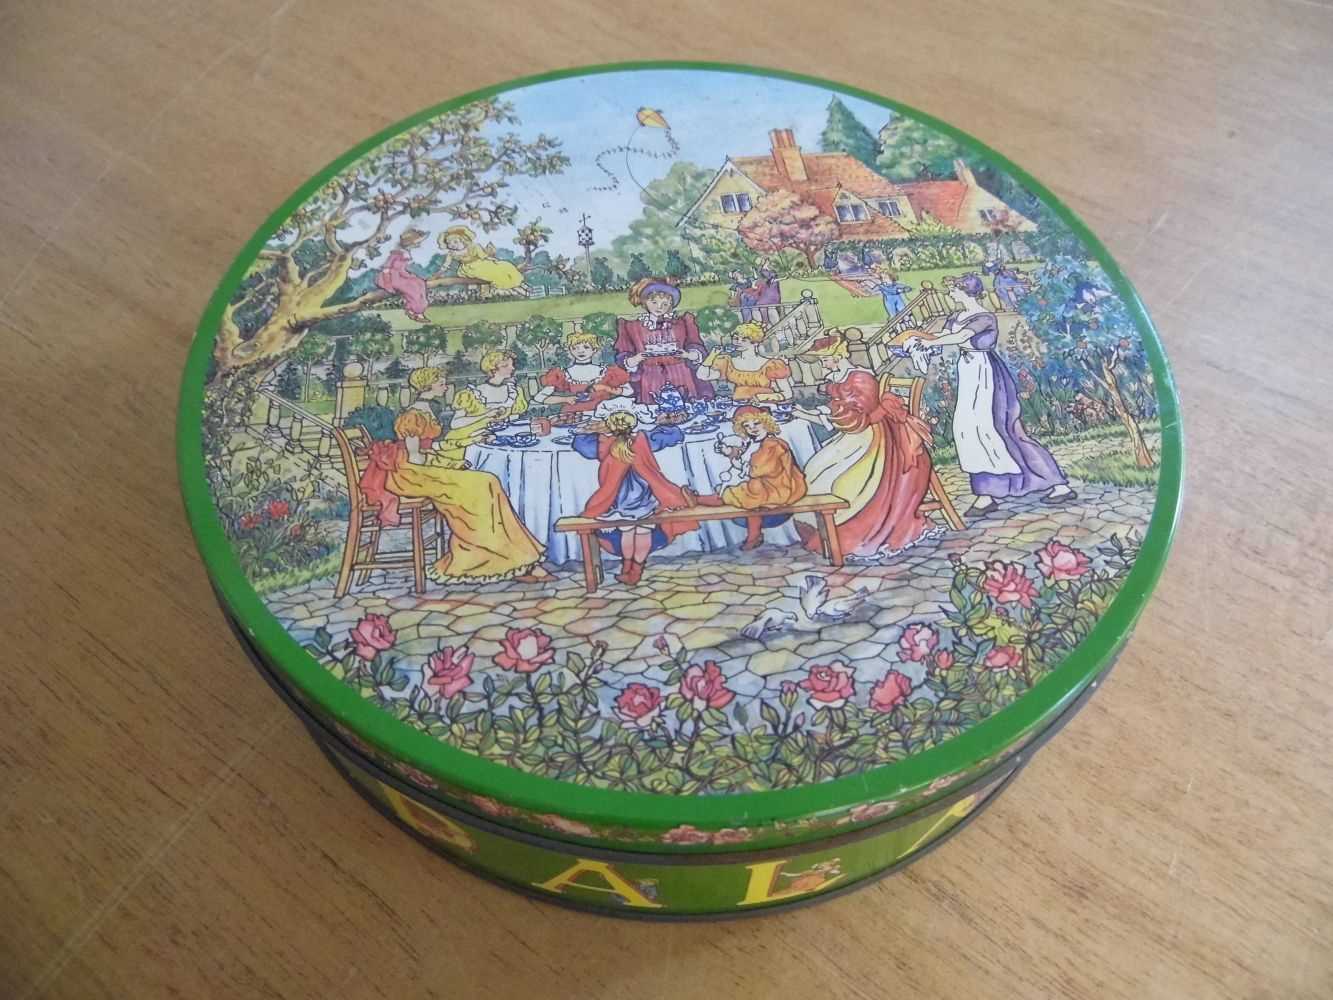 Lot 61 - Huntley & Palmers. A Huntley & Palmers "Rude" biscuit tin